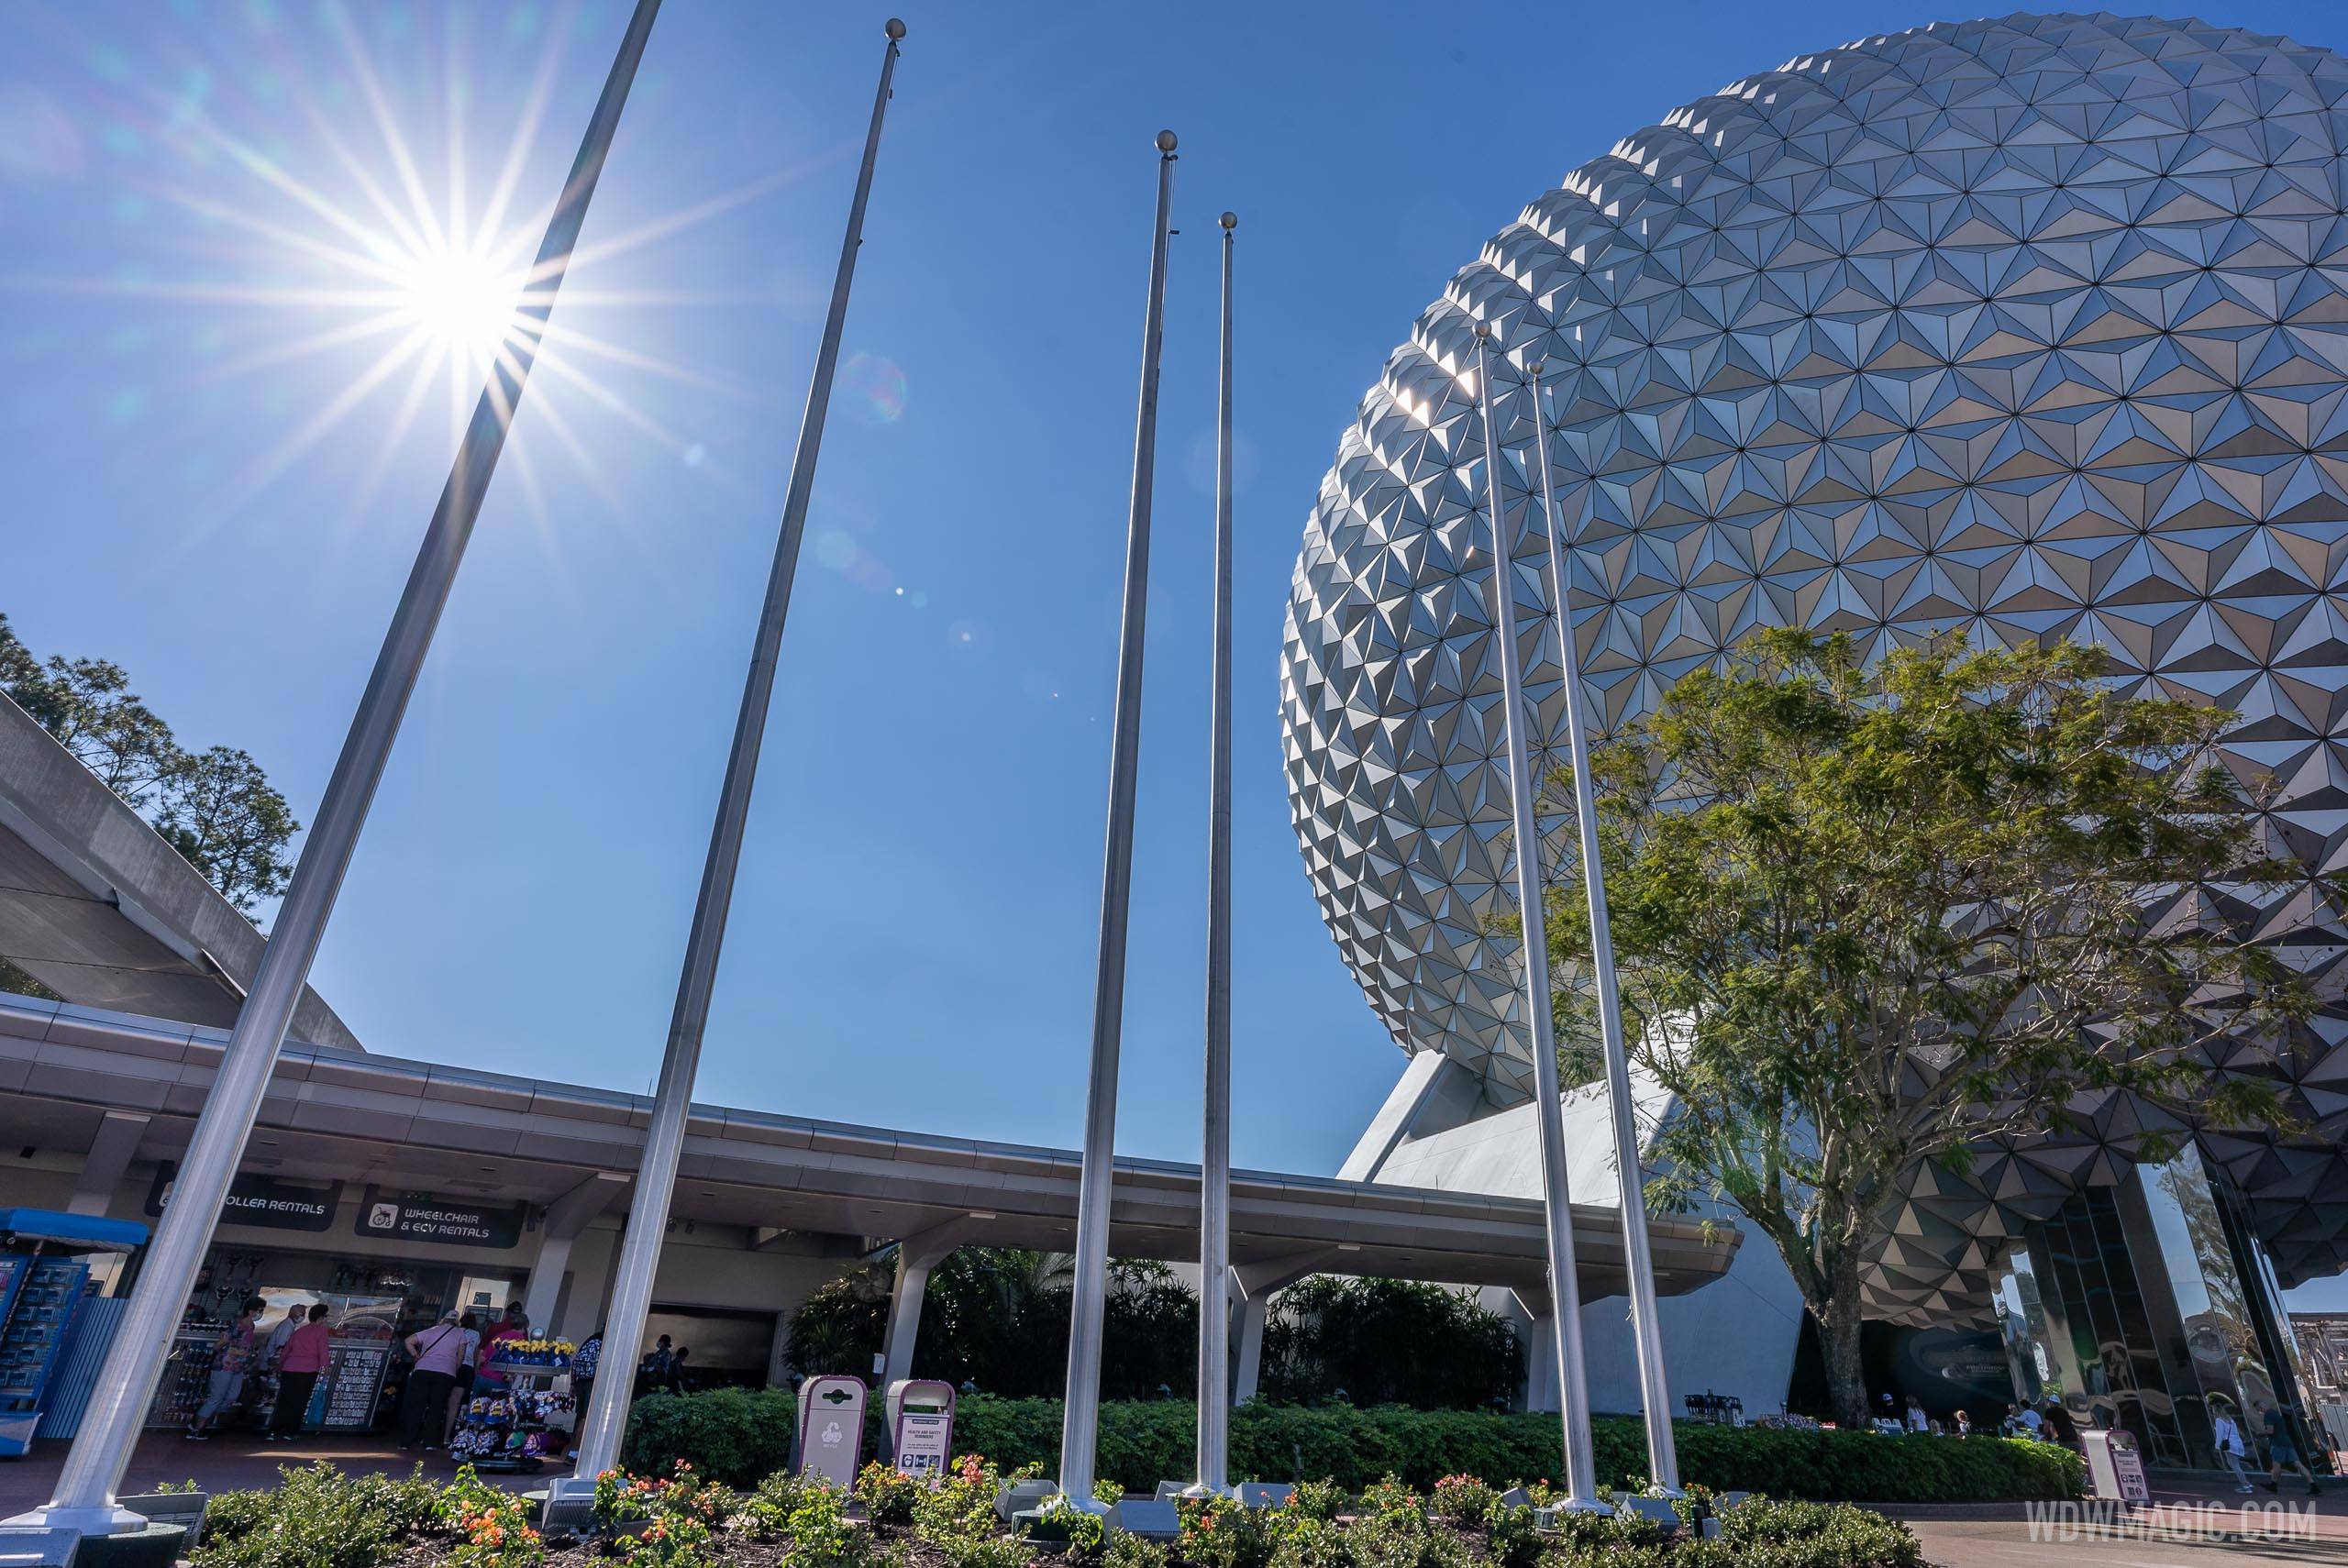 PHOTOS - First 6 flag poles installed on the east side of the new EPCOT main entrance